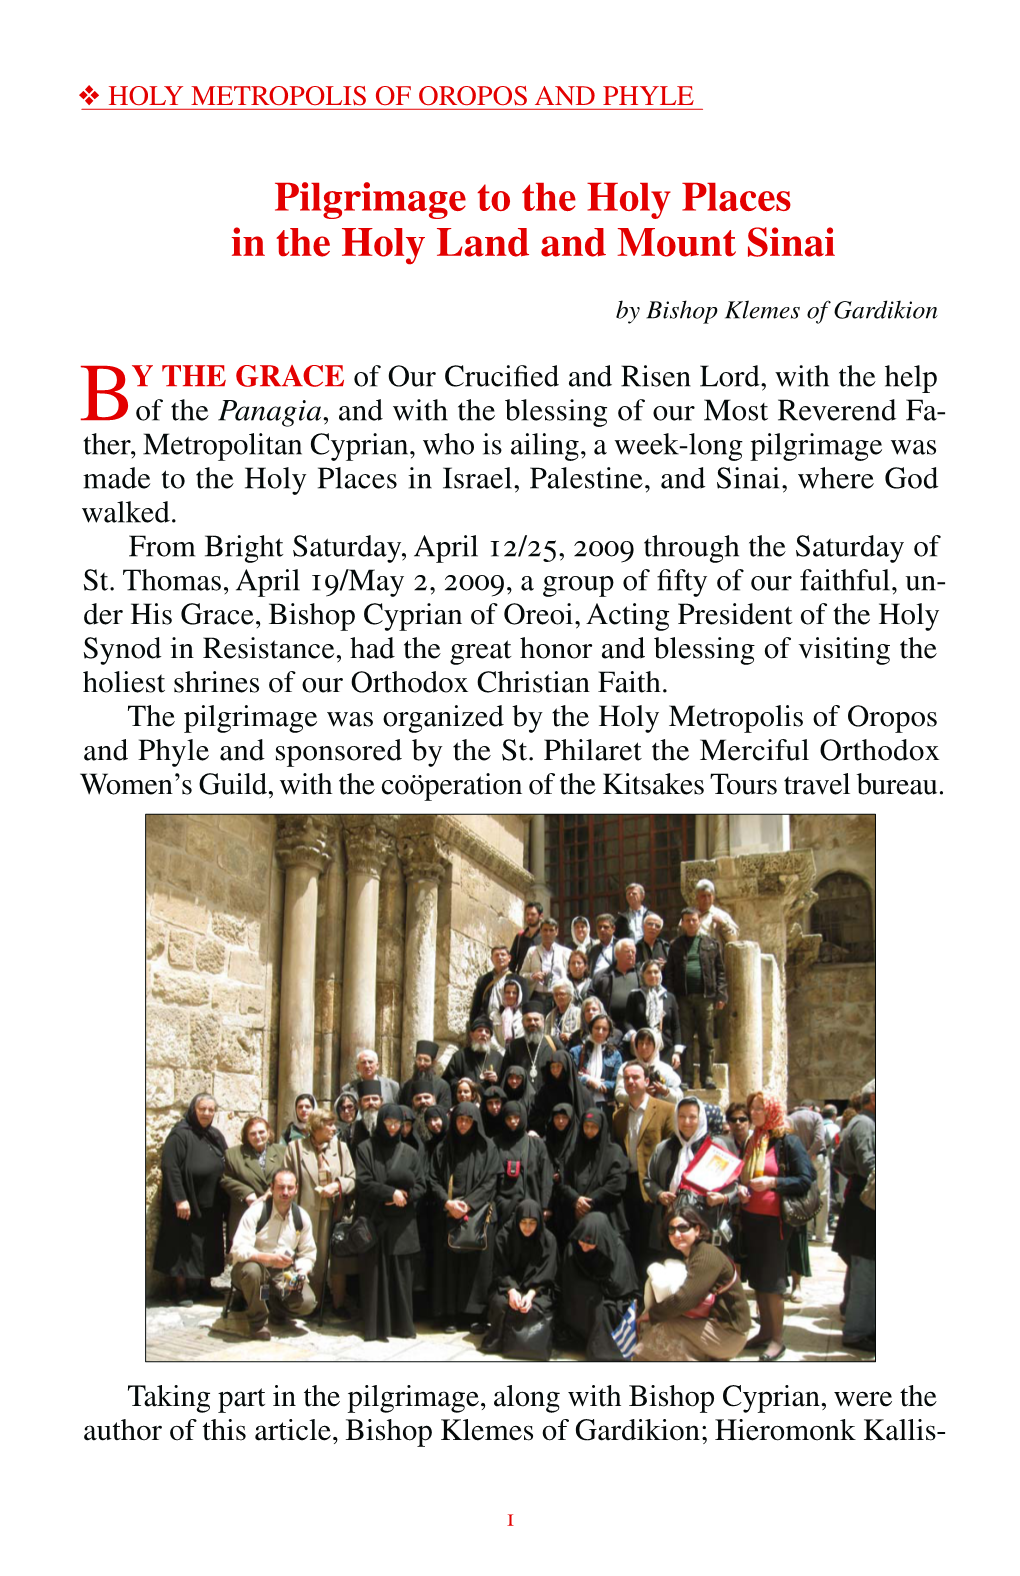 Pilgrimage to the Holy Places in the Holy Land and Mount Sinai